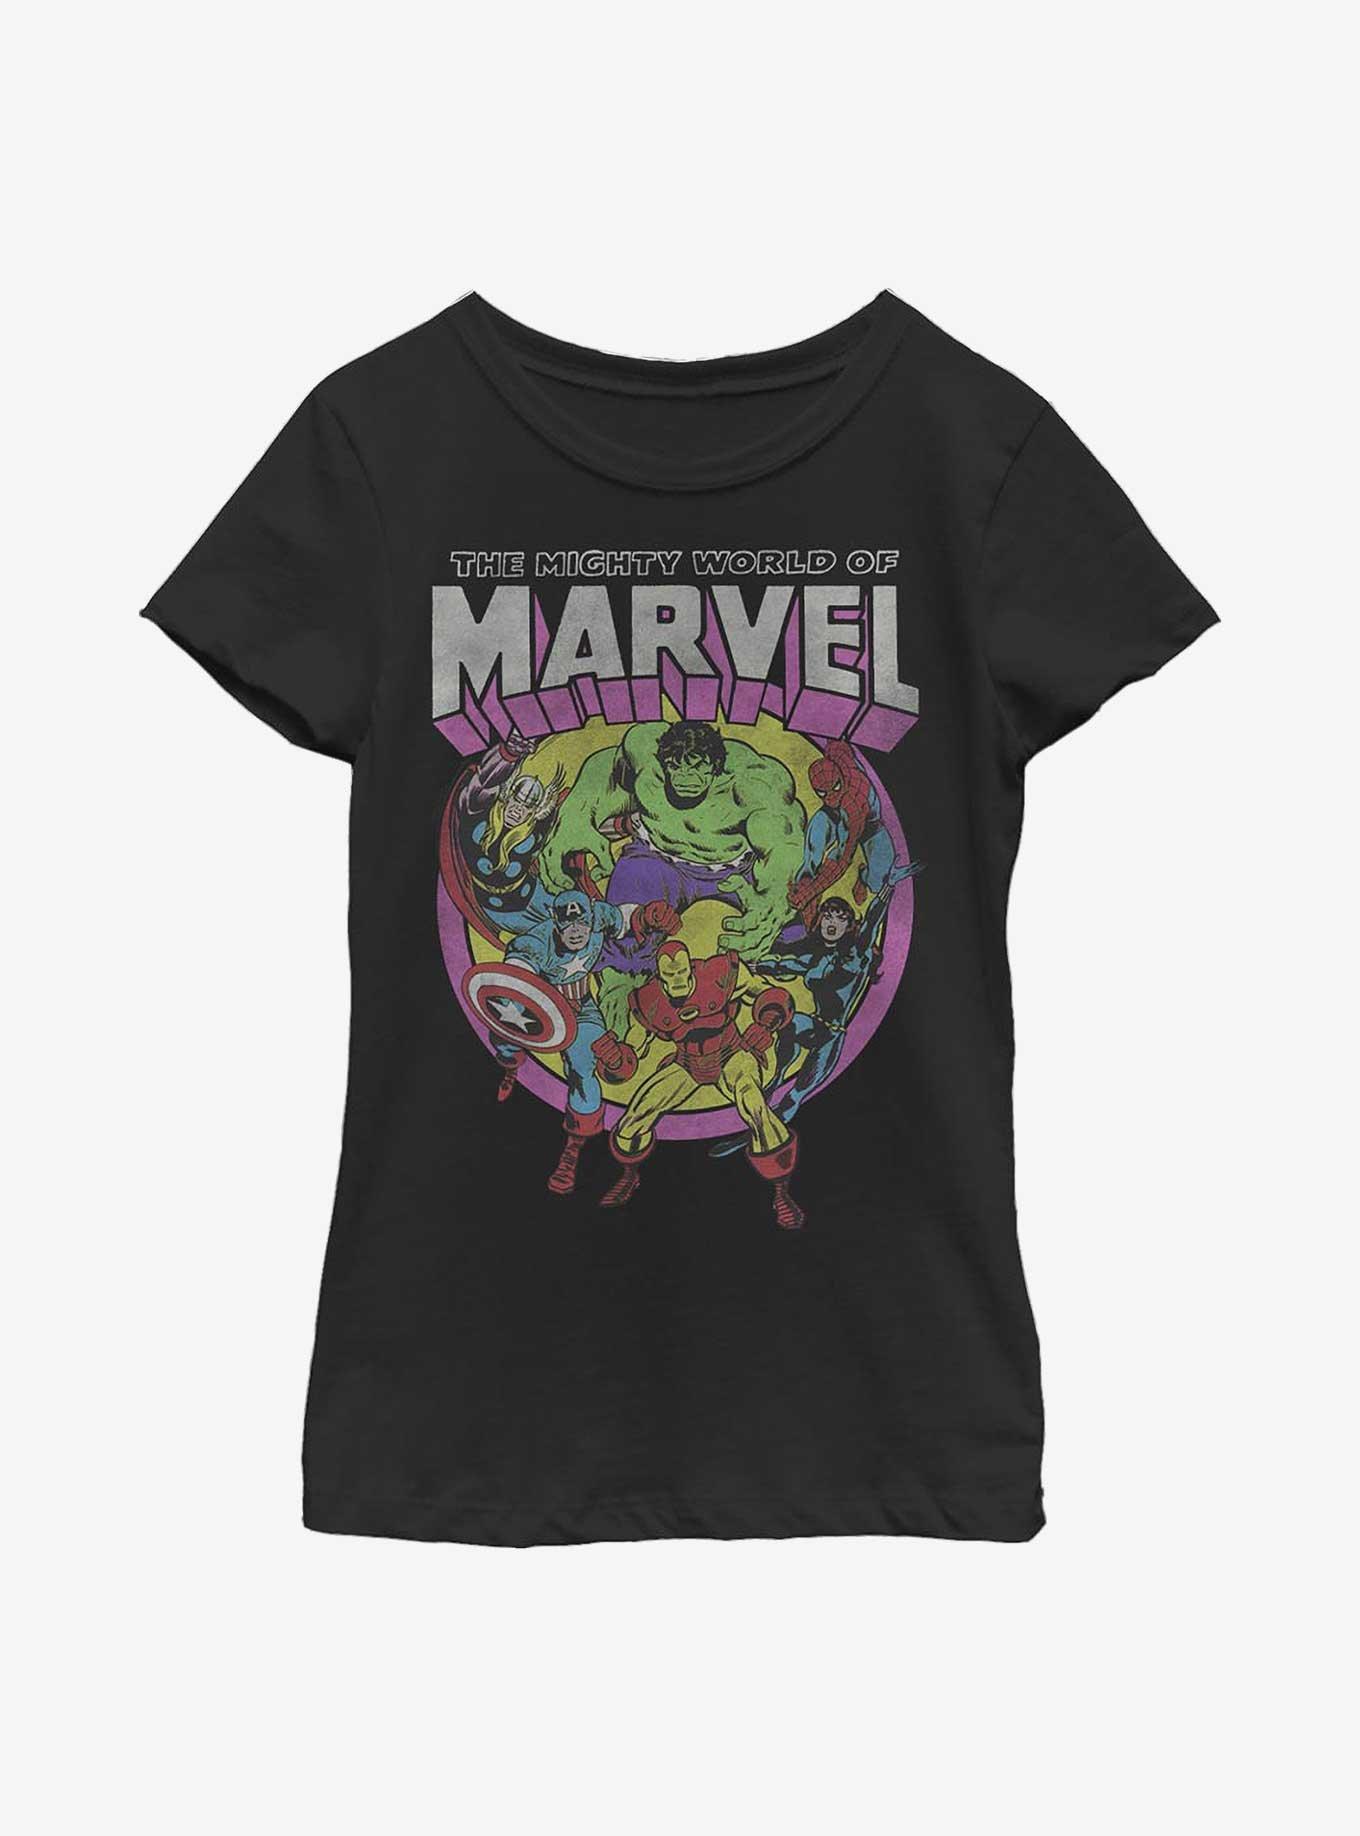 Marvel Avengers Mighty World Heroes Youth Girls T-Shirt, BLACK, hi-res